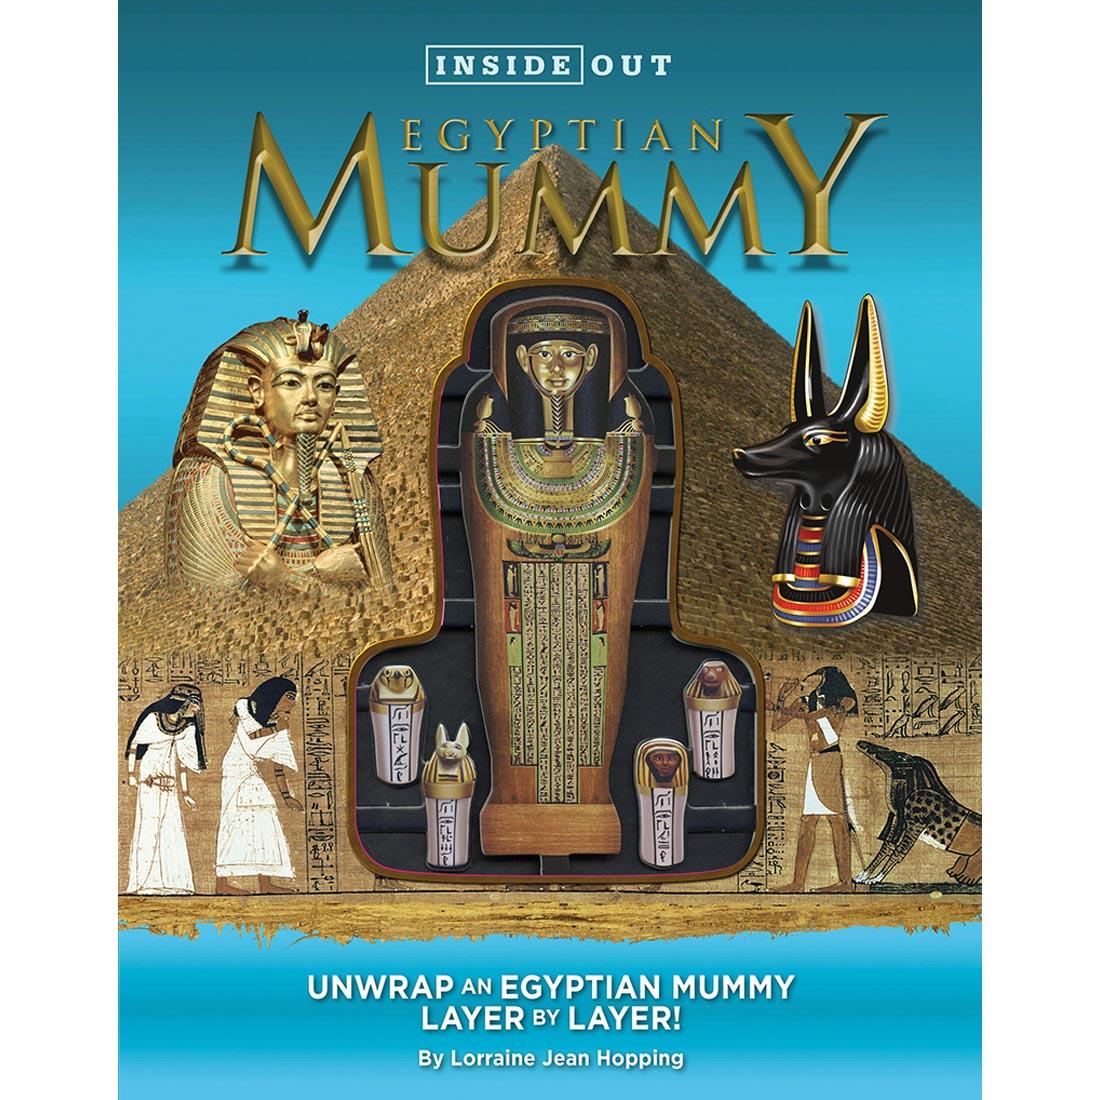 cover of Inside Out Book: Egyptian Mummy, showing a layered, interactive die-cut model of a mummy that changes as pages are flipped